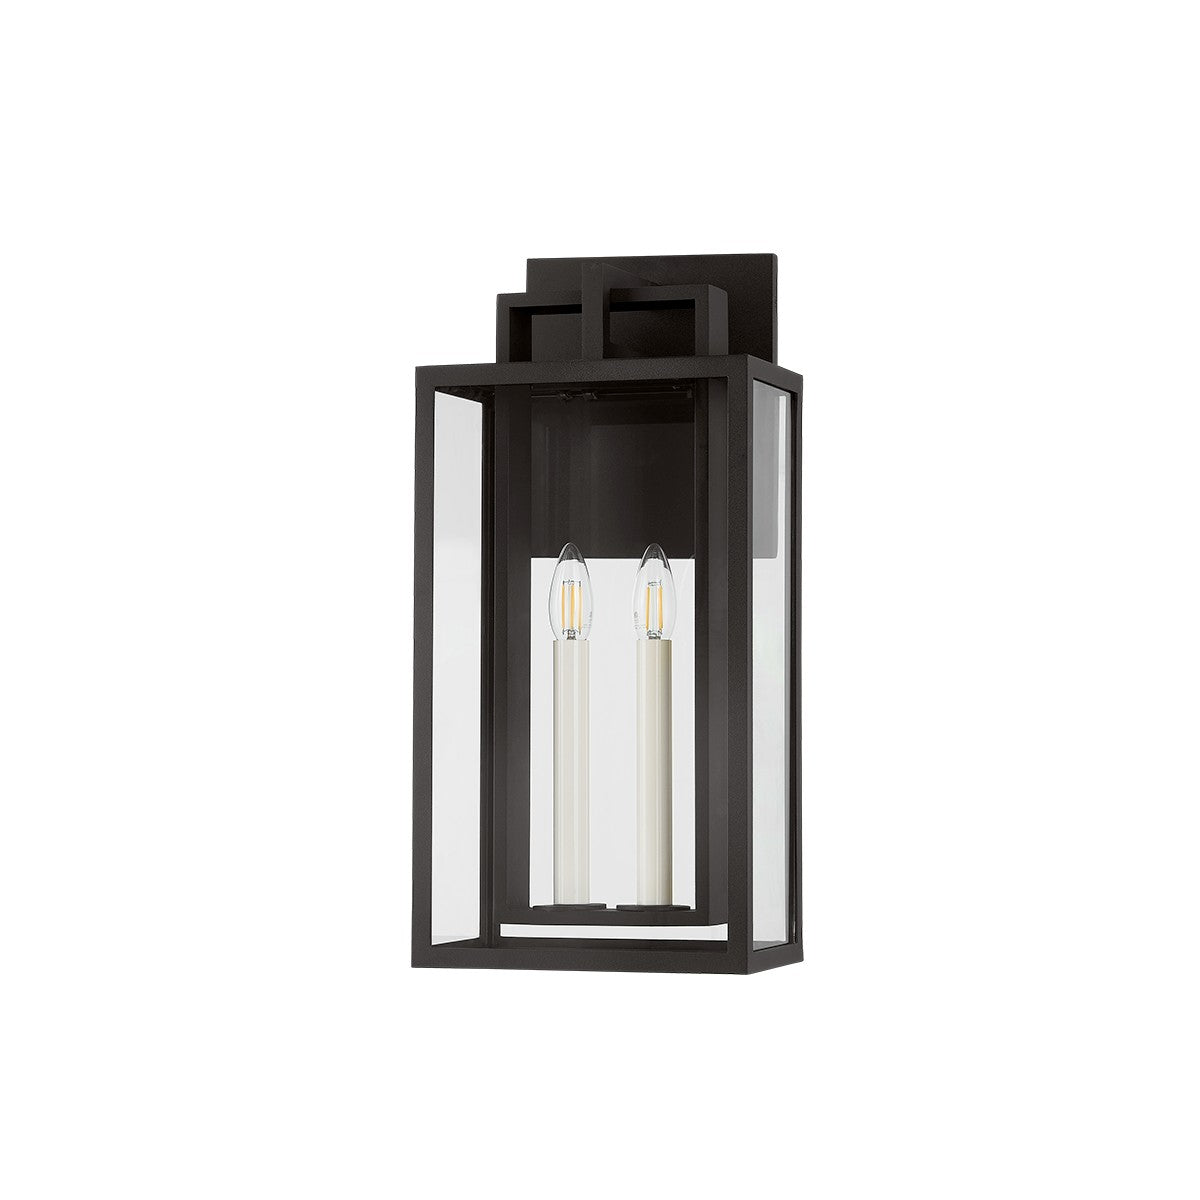 Troy Lighting - B3620-TBK - Two Light Exterior Wall Sconce - Amire - Textured Black